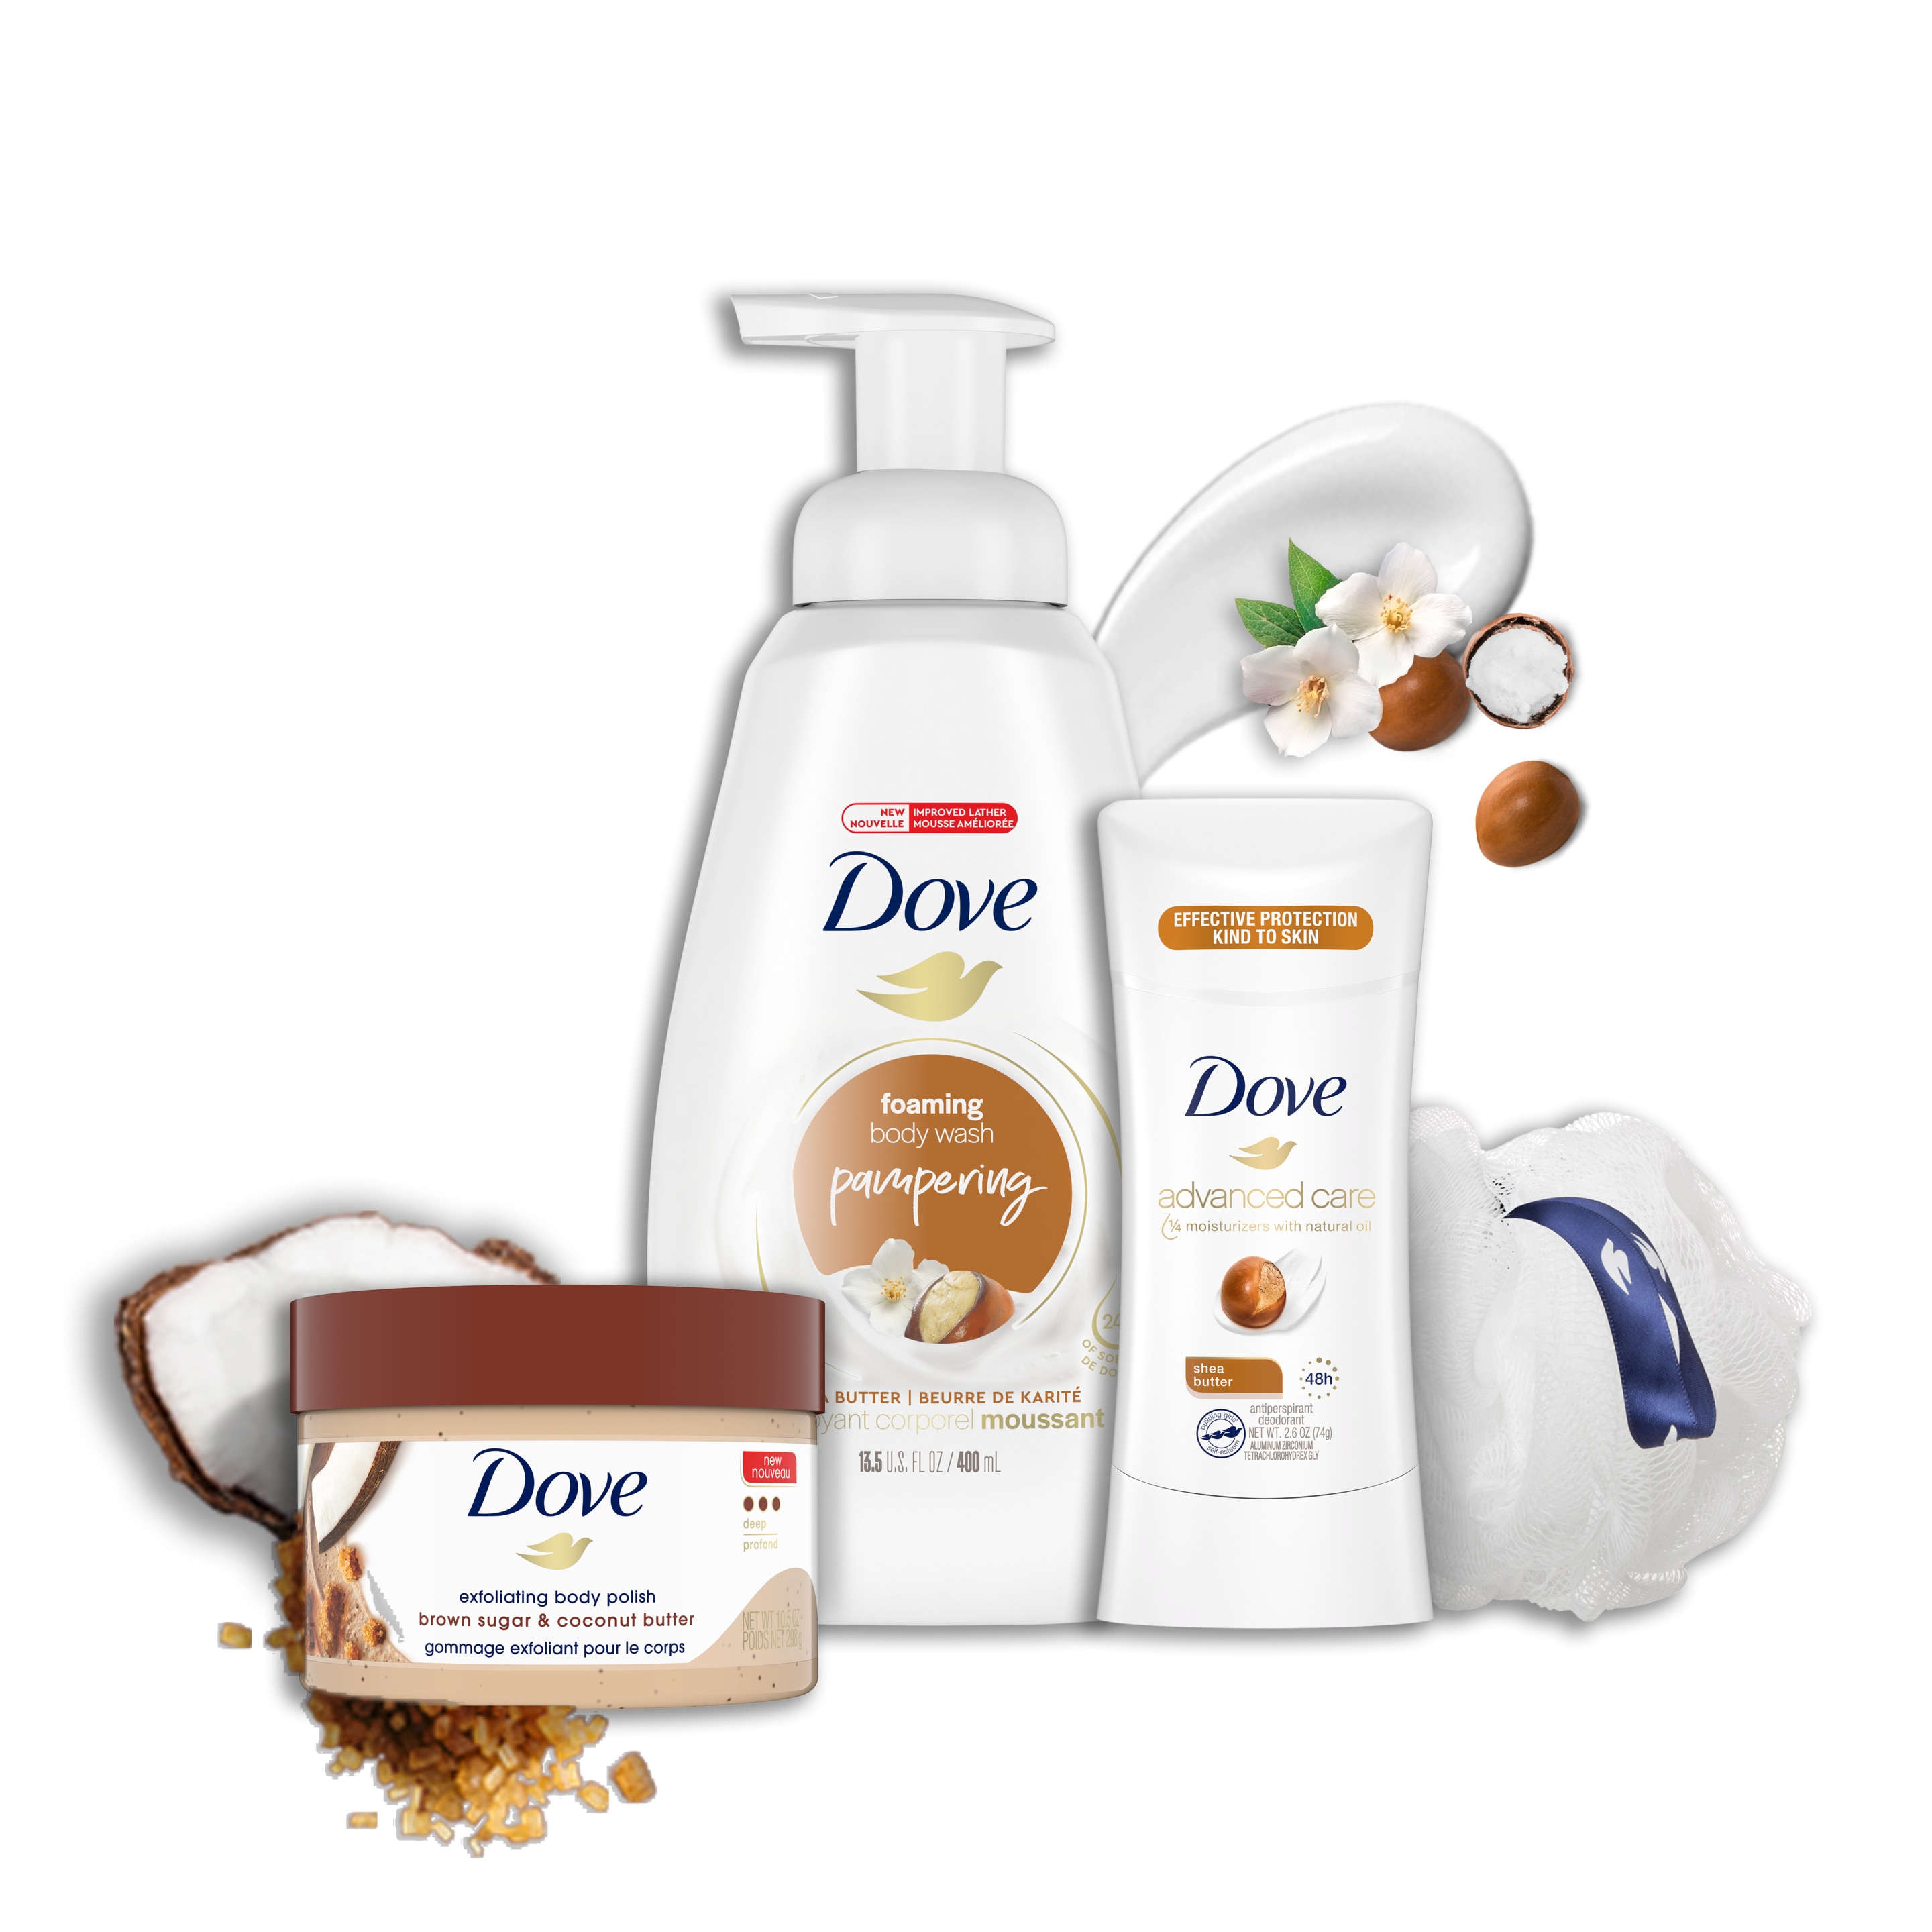 Exfoliating Body Polish and Foaming Body Wash and Antiperspirant Deodorant and Body Lotion sample and Body Pouf